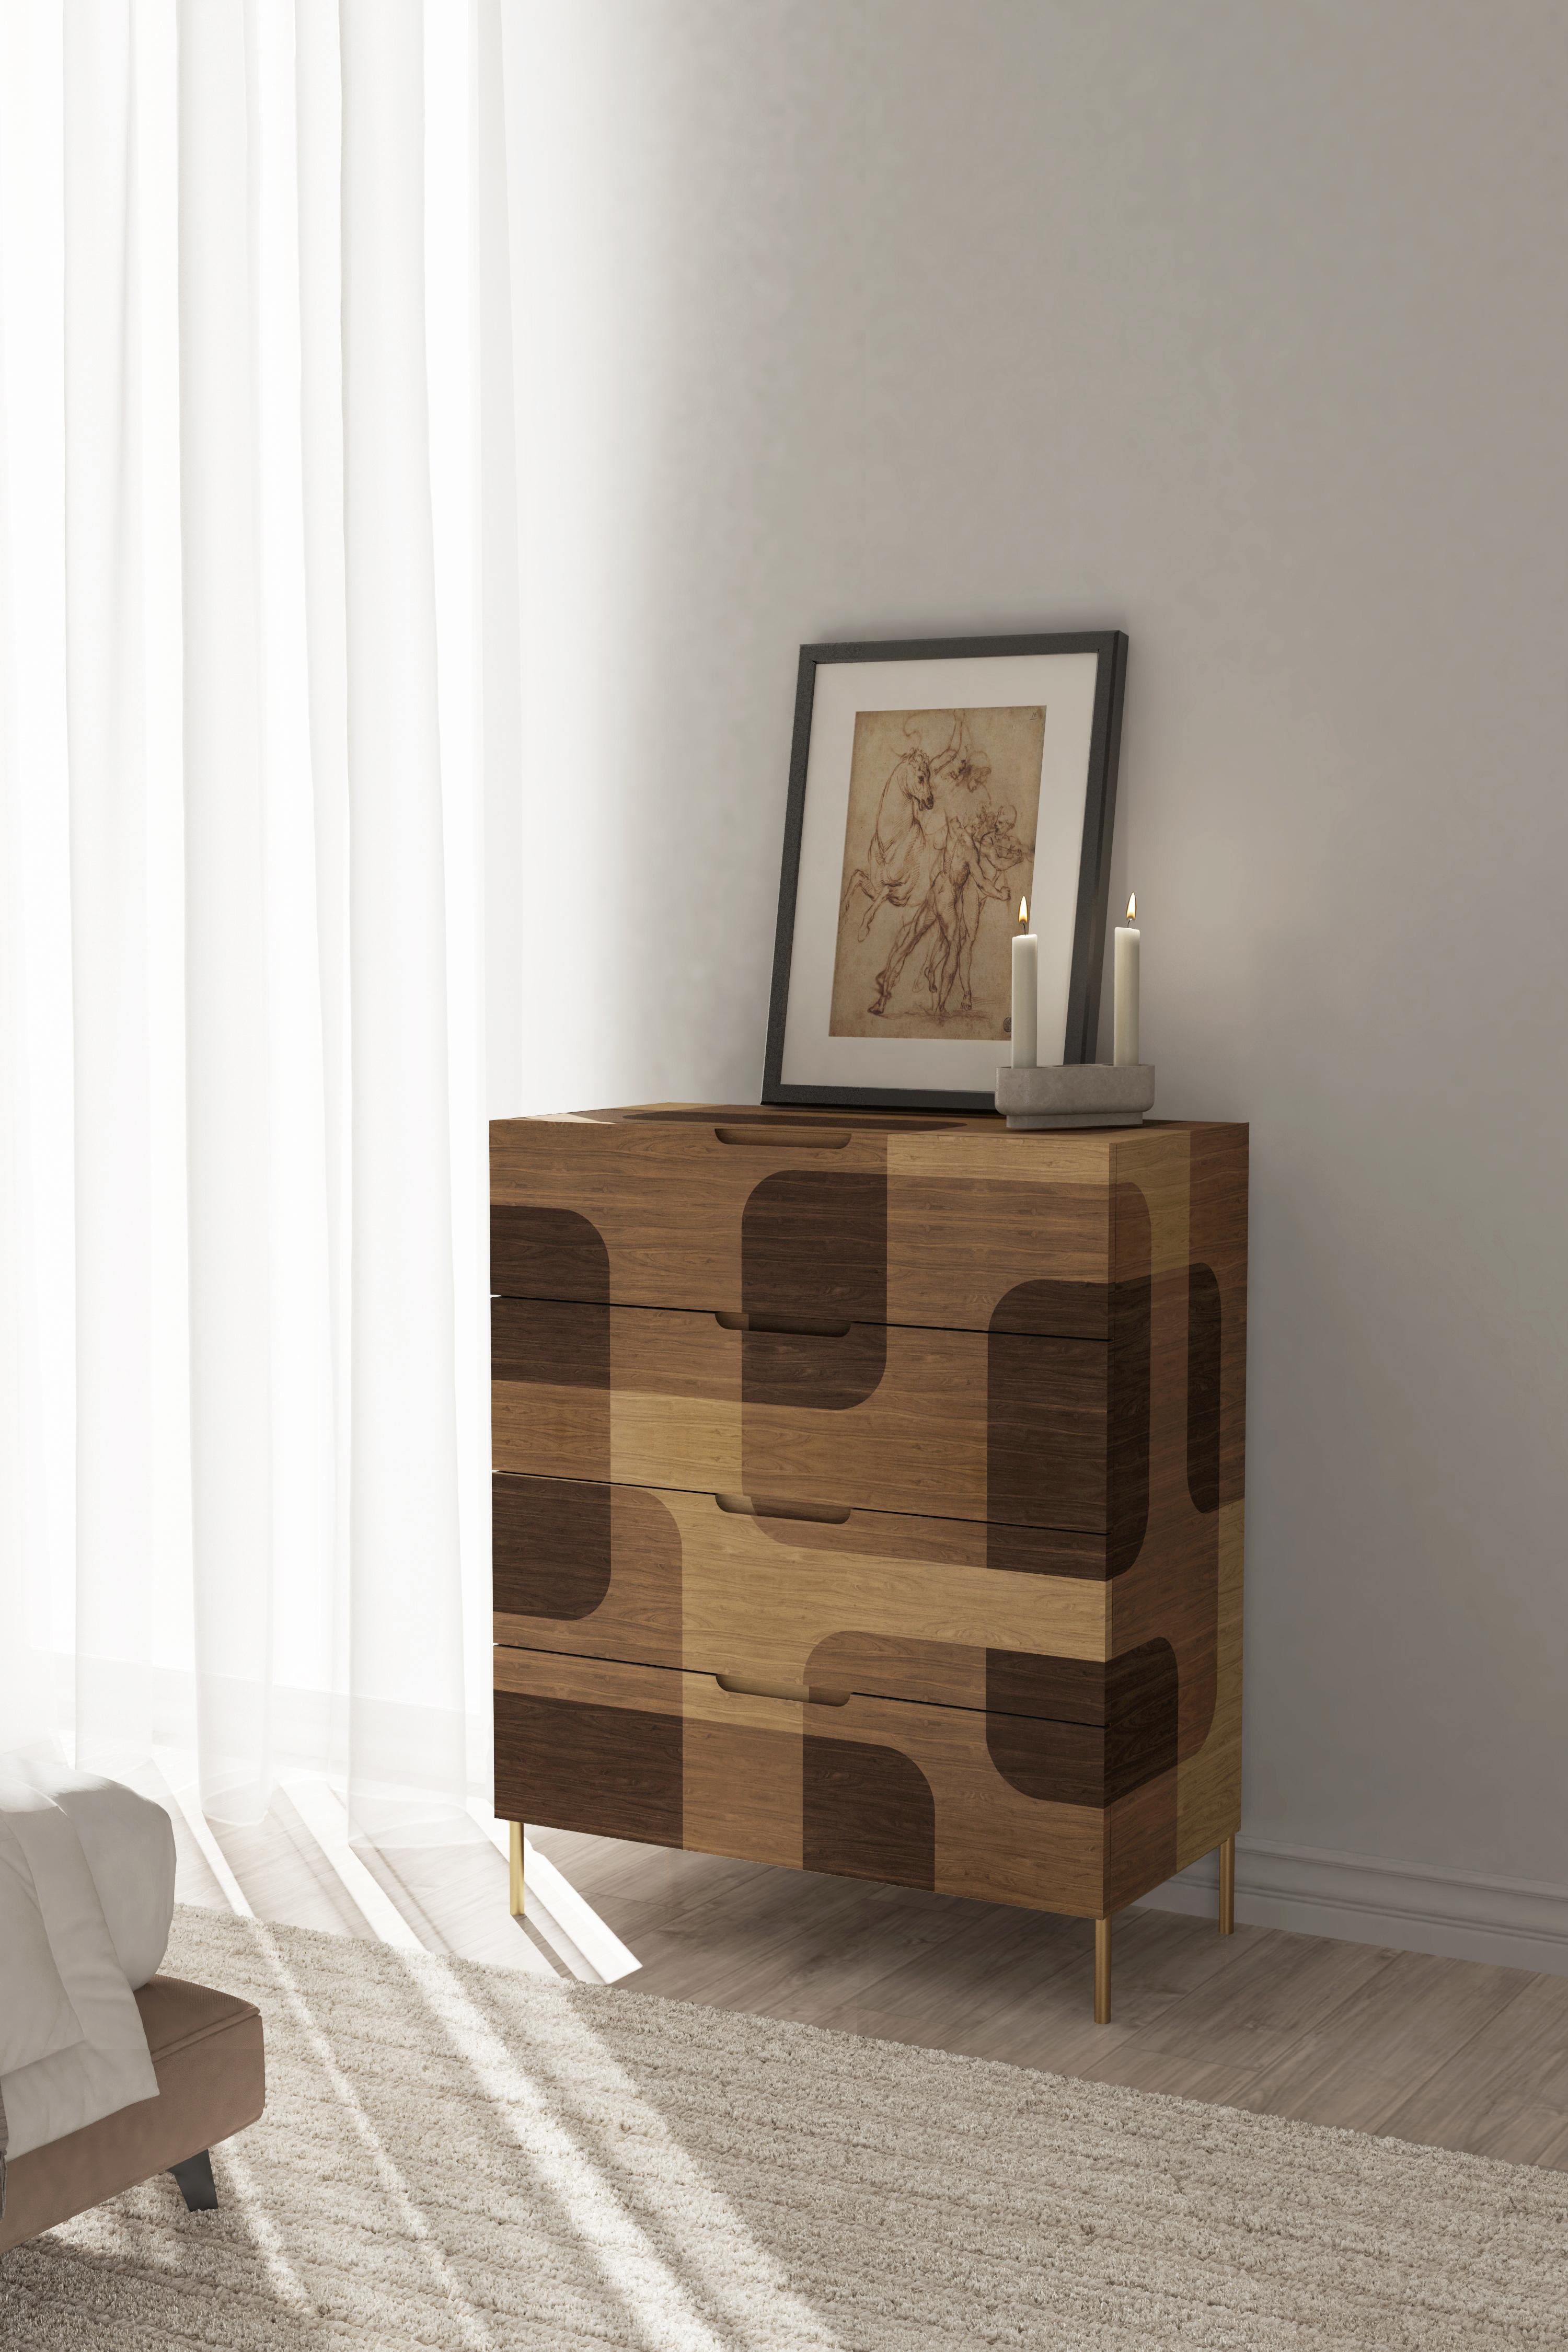 Contemporary Bodega Dresser, Chest of Drawers in Warm Wood Marquetry Veneer by Joel Escalona For Sale